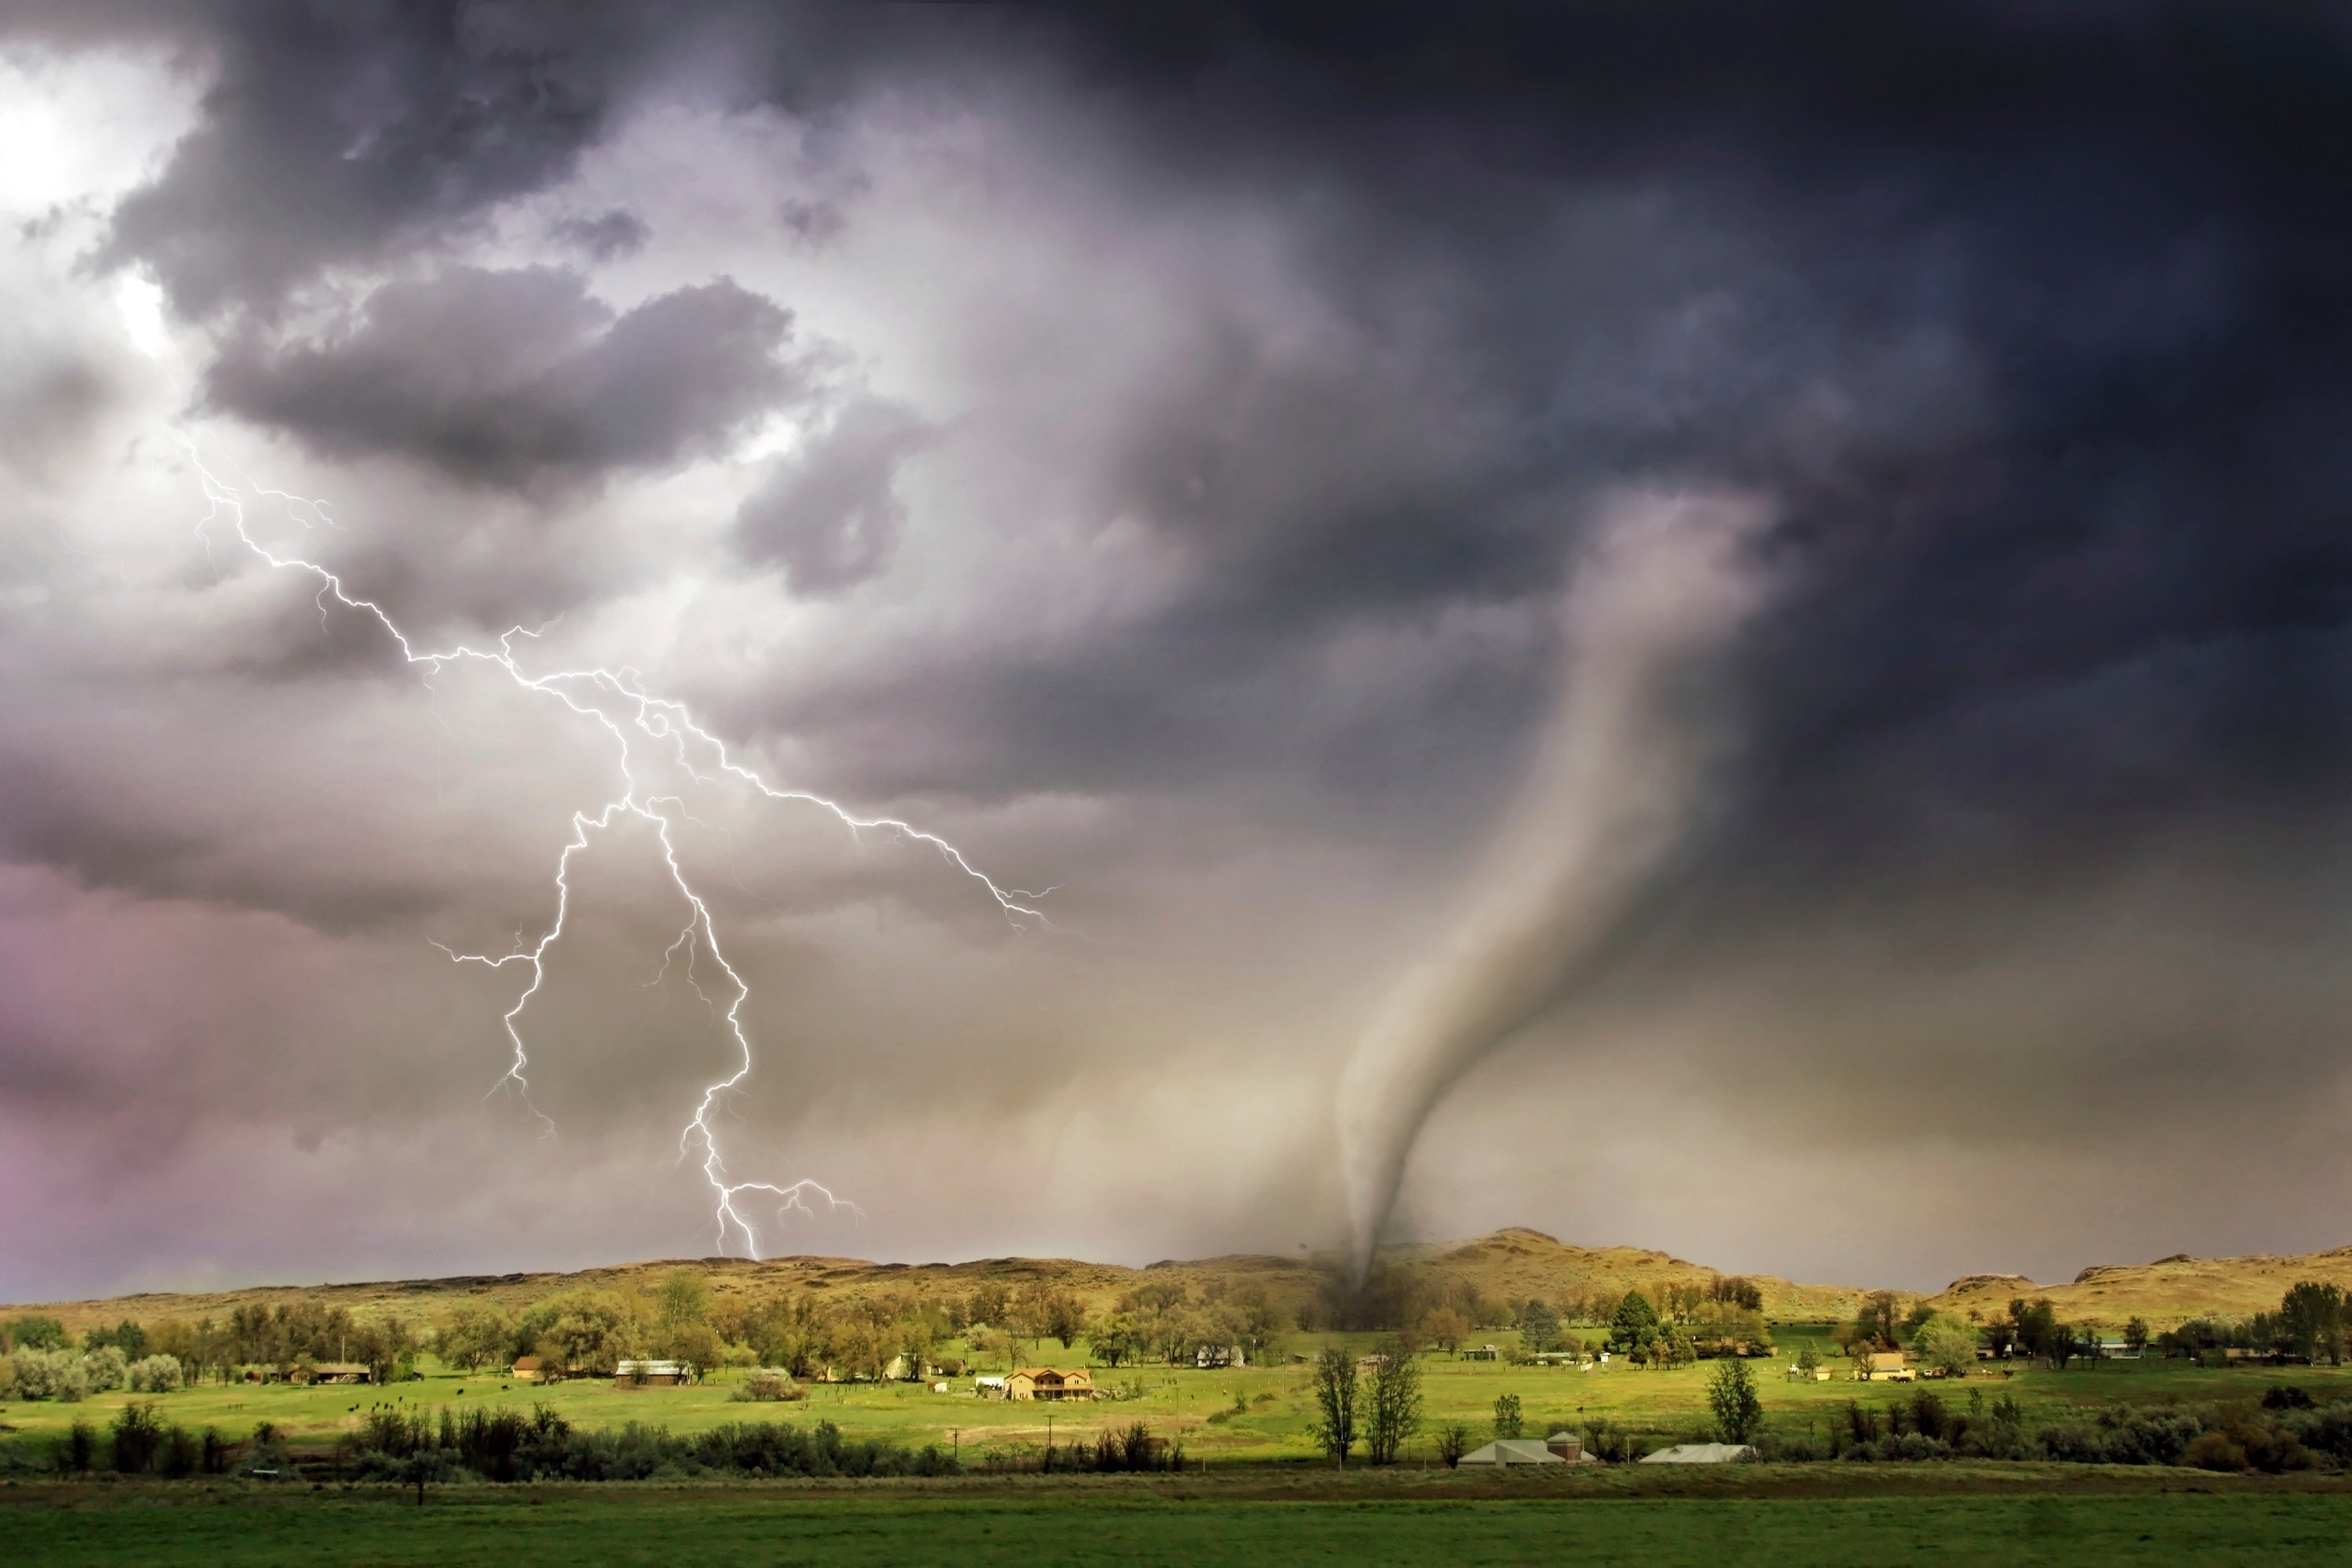 How long does it take a tornado to form and touch the ground?